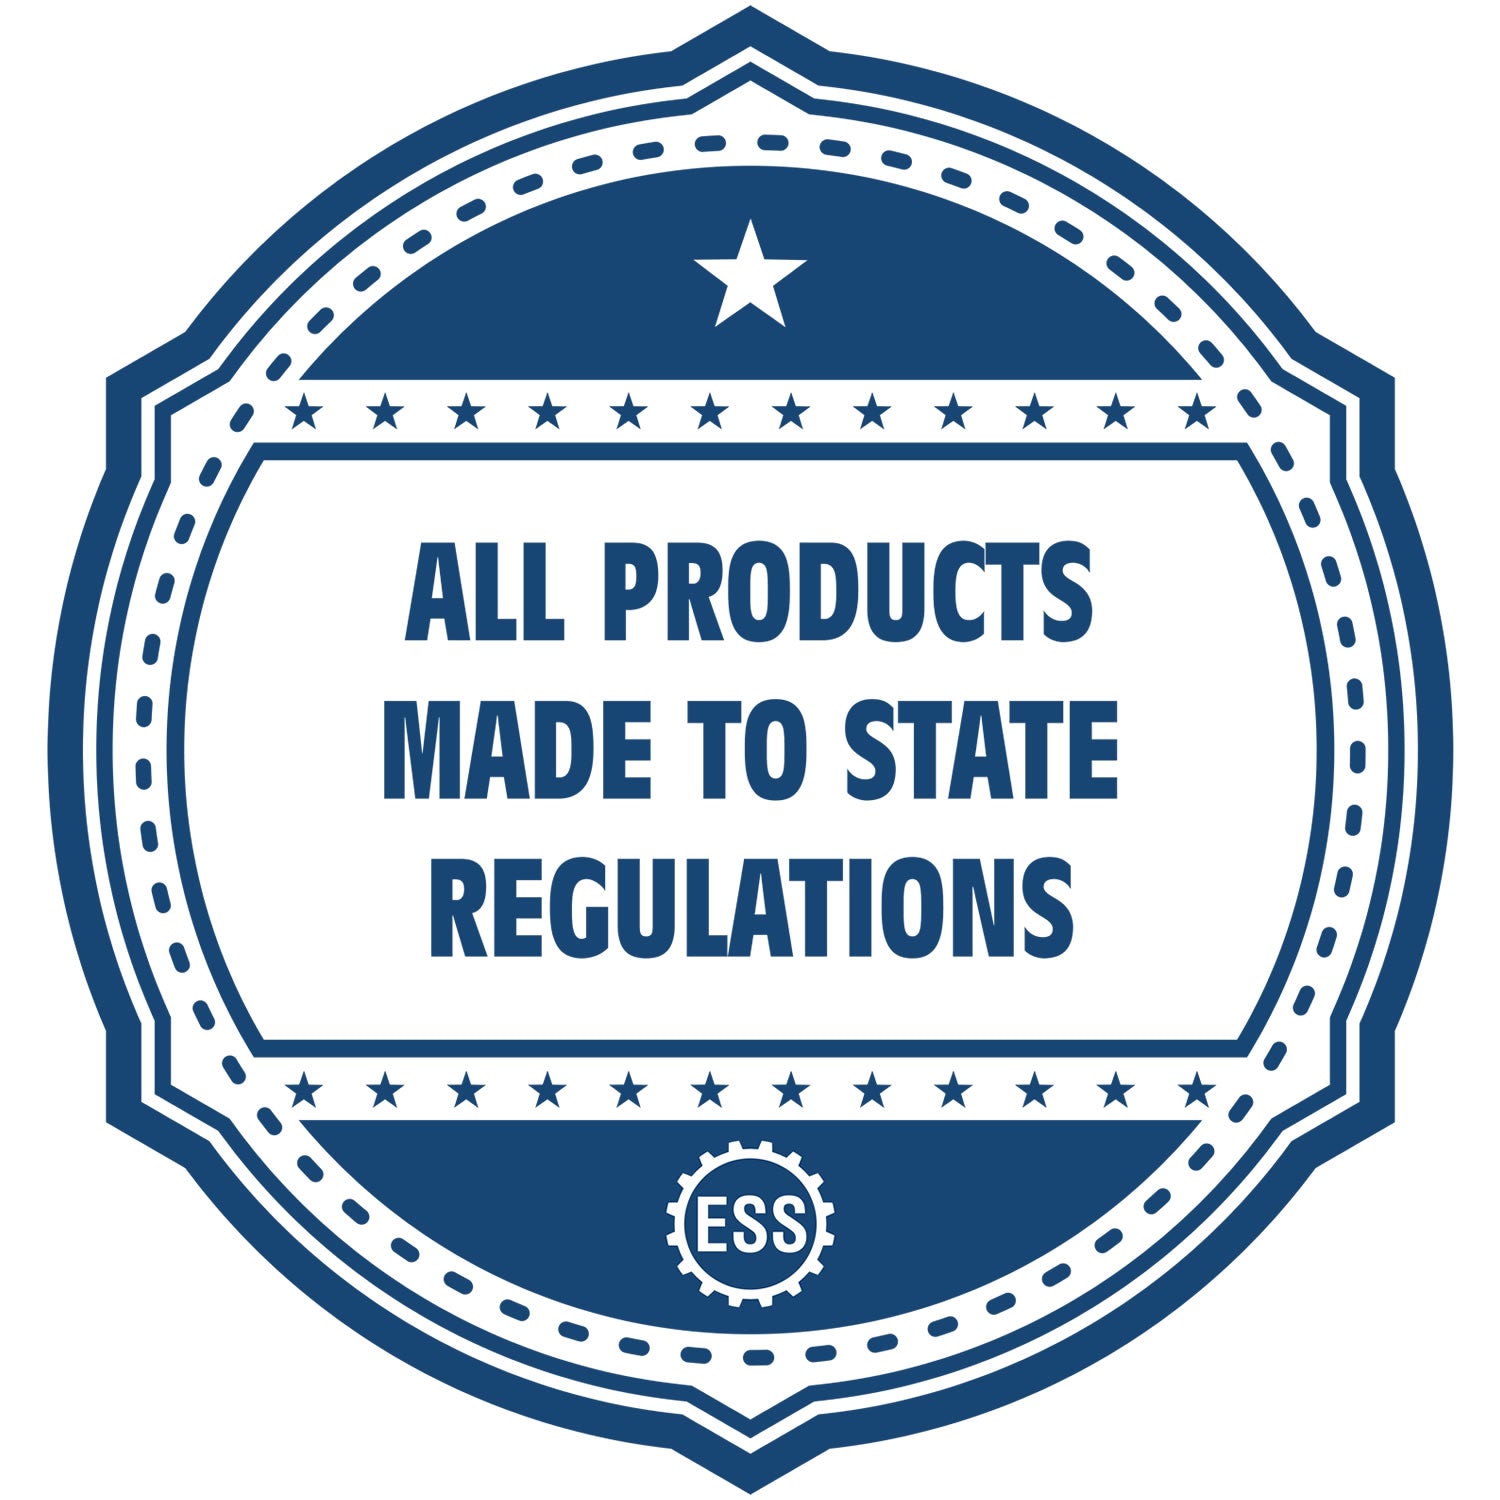 An icon or badge element for the Digital Nevada Landscape Architect Stamp showing that this product is made in compliance with state regulations.